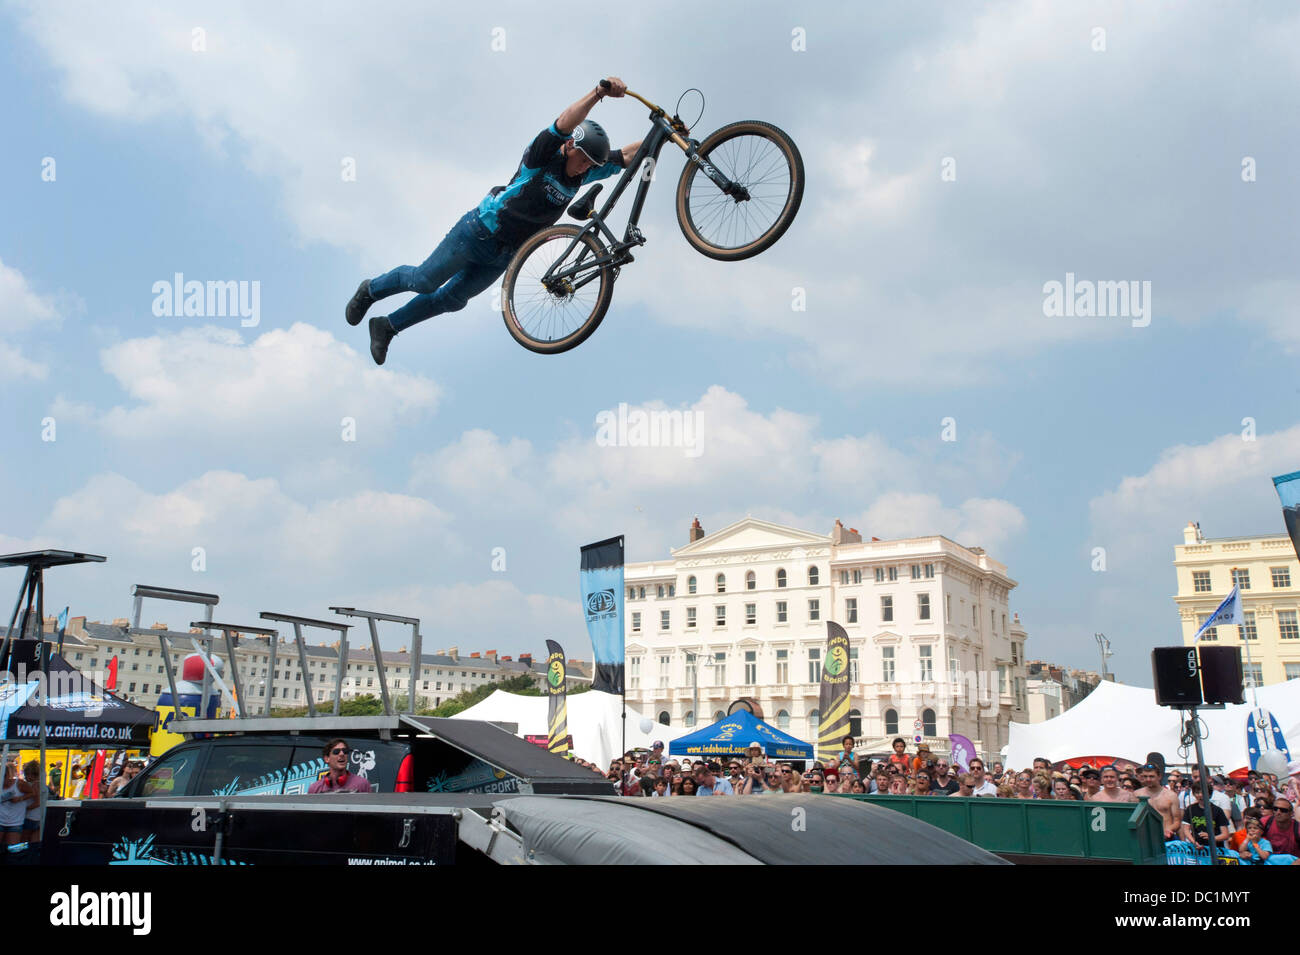 BMX sporting action at a beach festival in Brighton England. Stock Photo